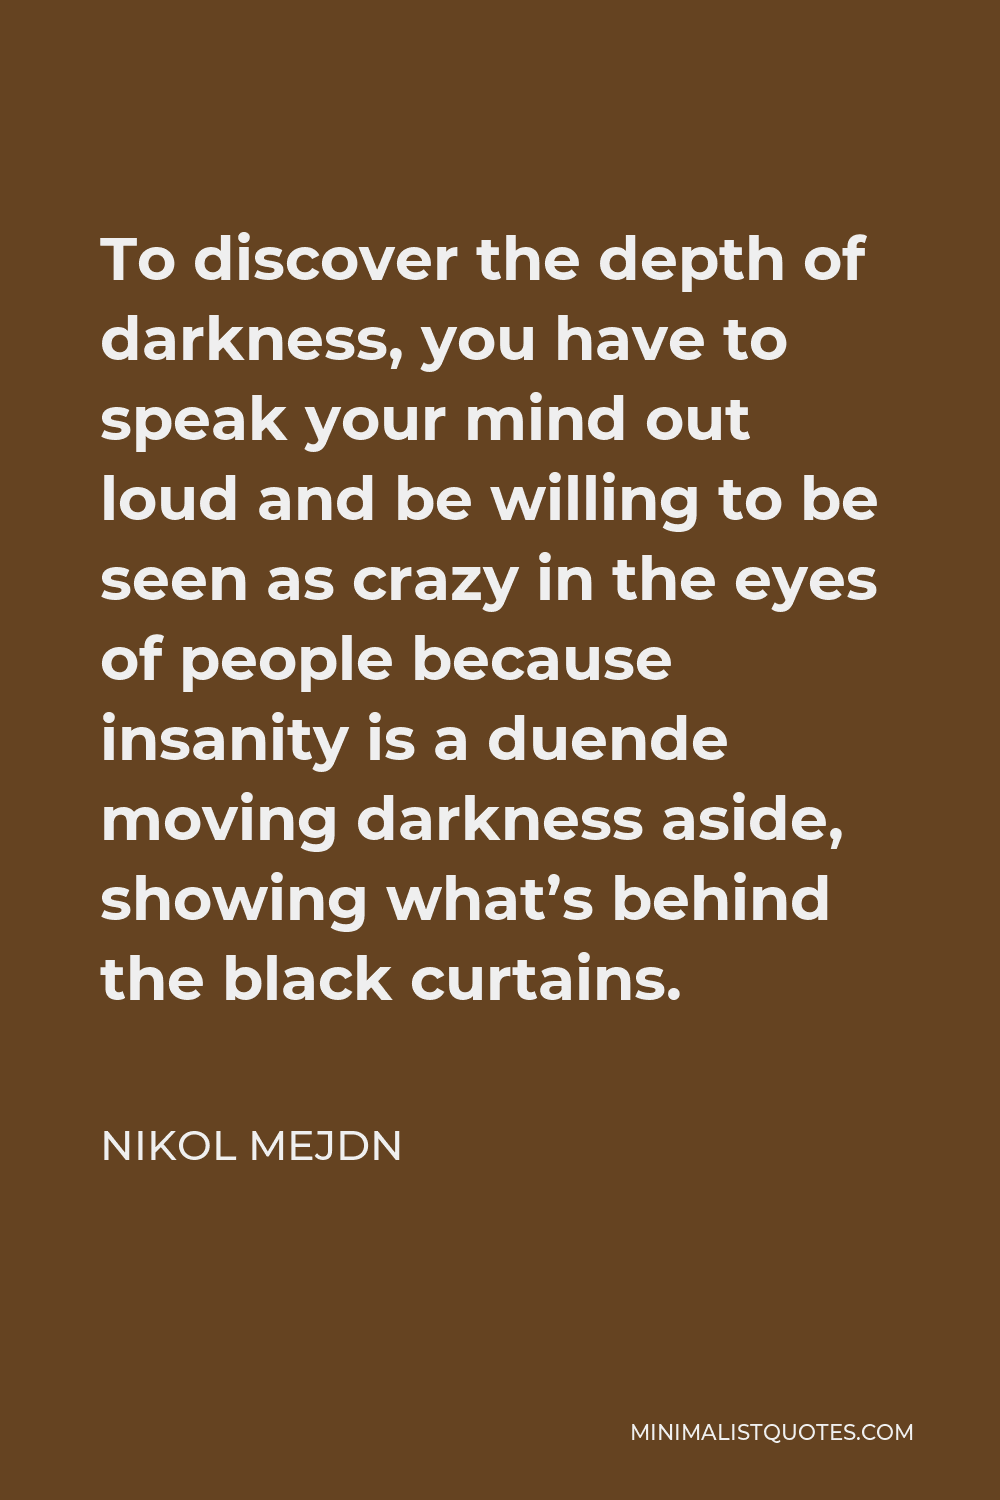 Nikol Mejdn Quote - To discover the depth of darkness, you have to speak your mind out loud and be willing to be seen as crazy in the eyes of people because insanity is a duende moving darkness aside, showing what’s behind the black curtains.